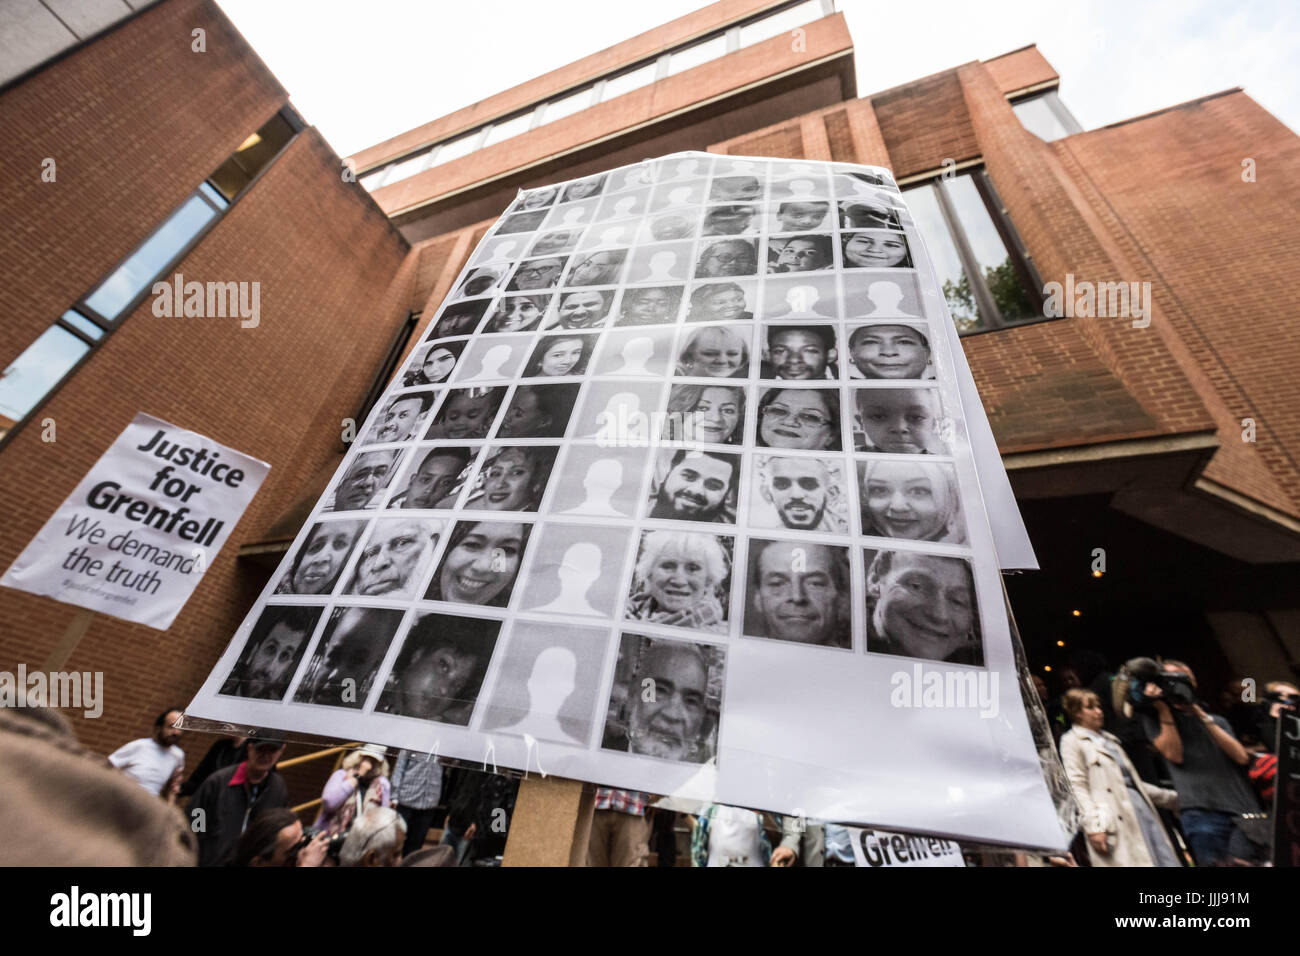 London, UK. 19th July, 2017. Grenfell Tower protest. Hundreds of angry protesters gather outside Kensington town hall ahead of the first full council meeting since the fire disaster. © Guy Corbishley/Alamy Live News Stock Photo